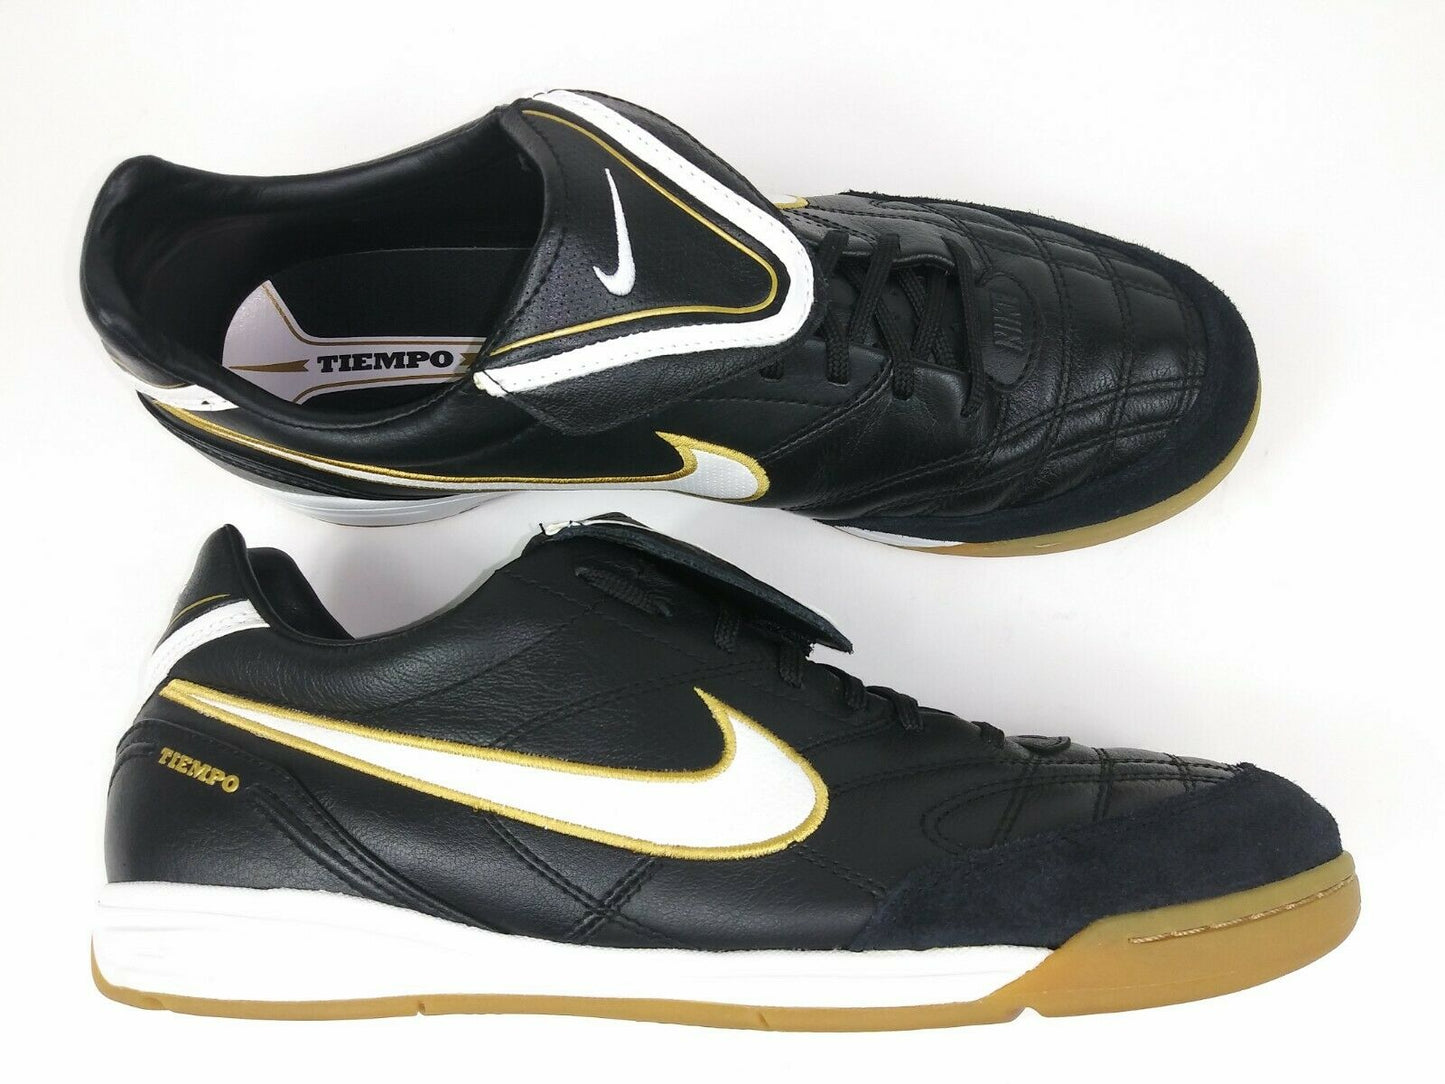 Nike Tiempo lll IC Indoor Shoes Black Gold